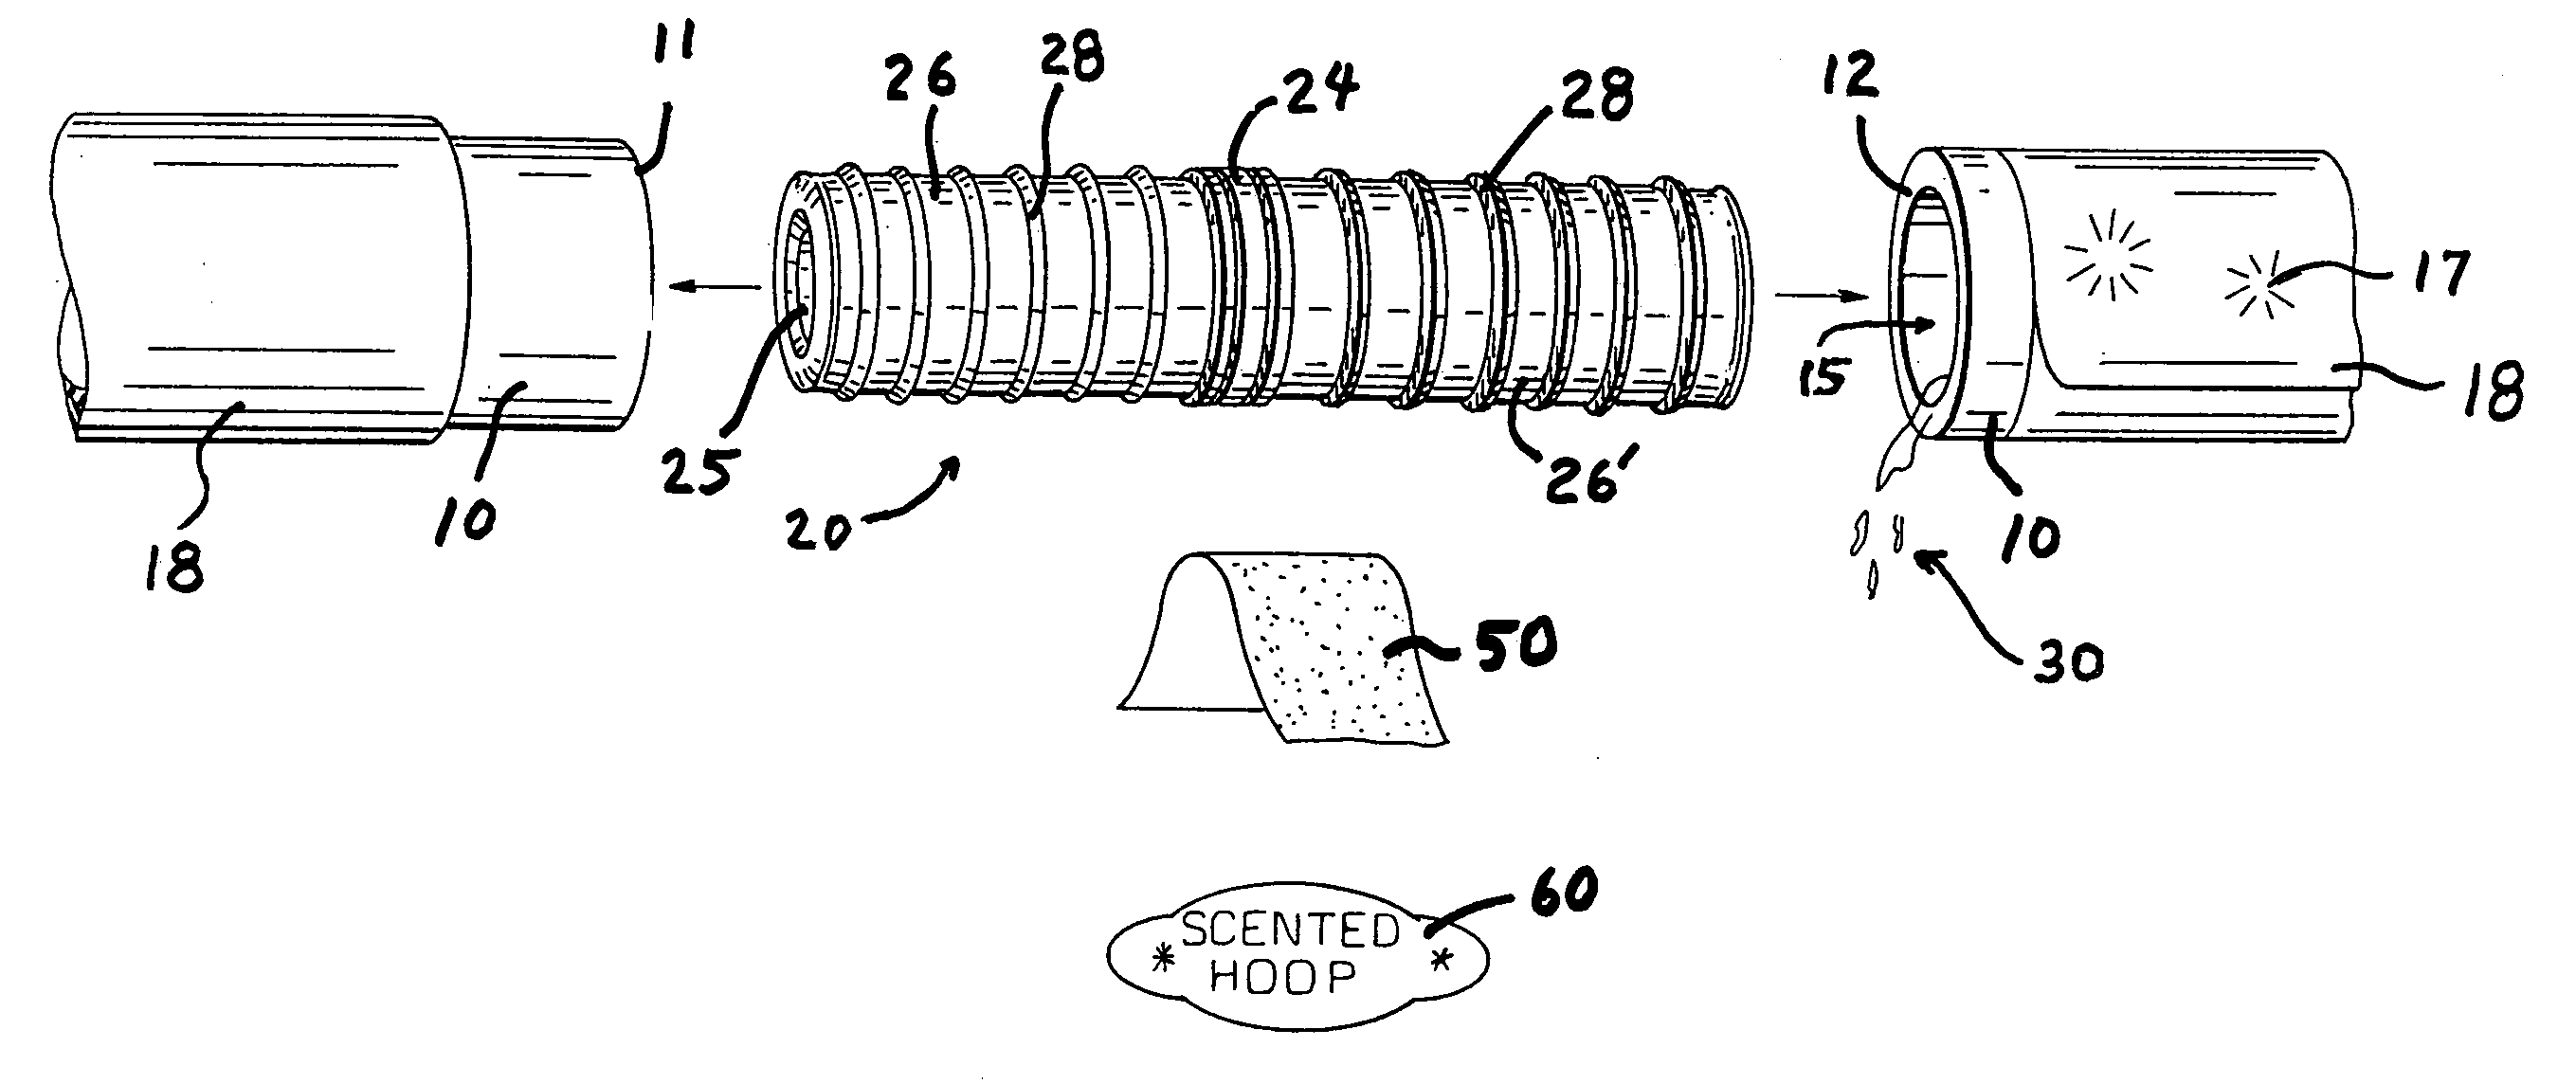 Liquid containing hoop with improved connector